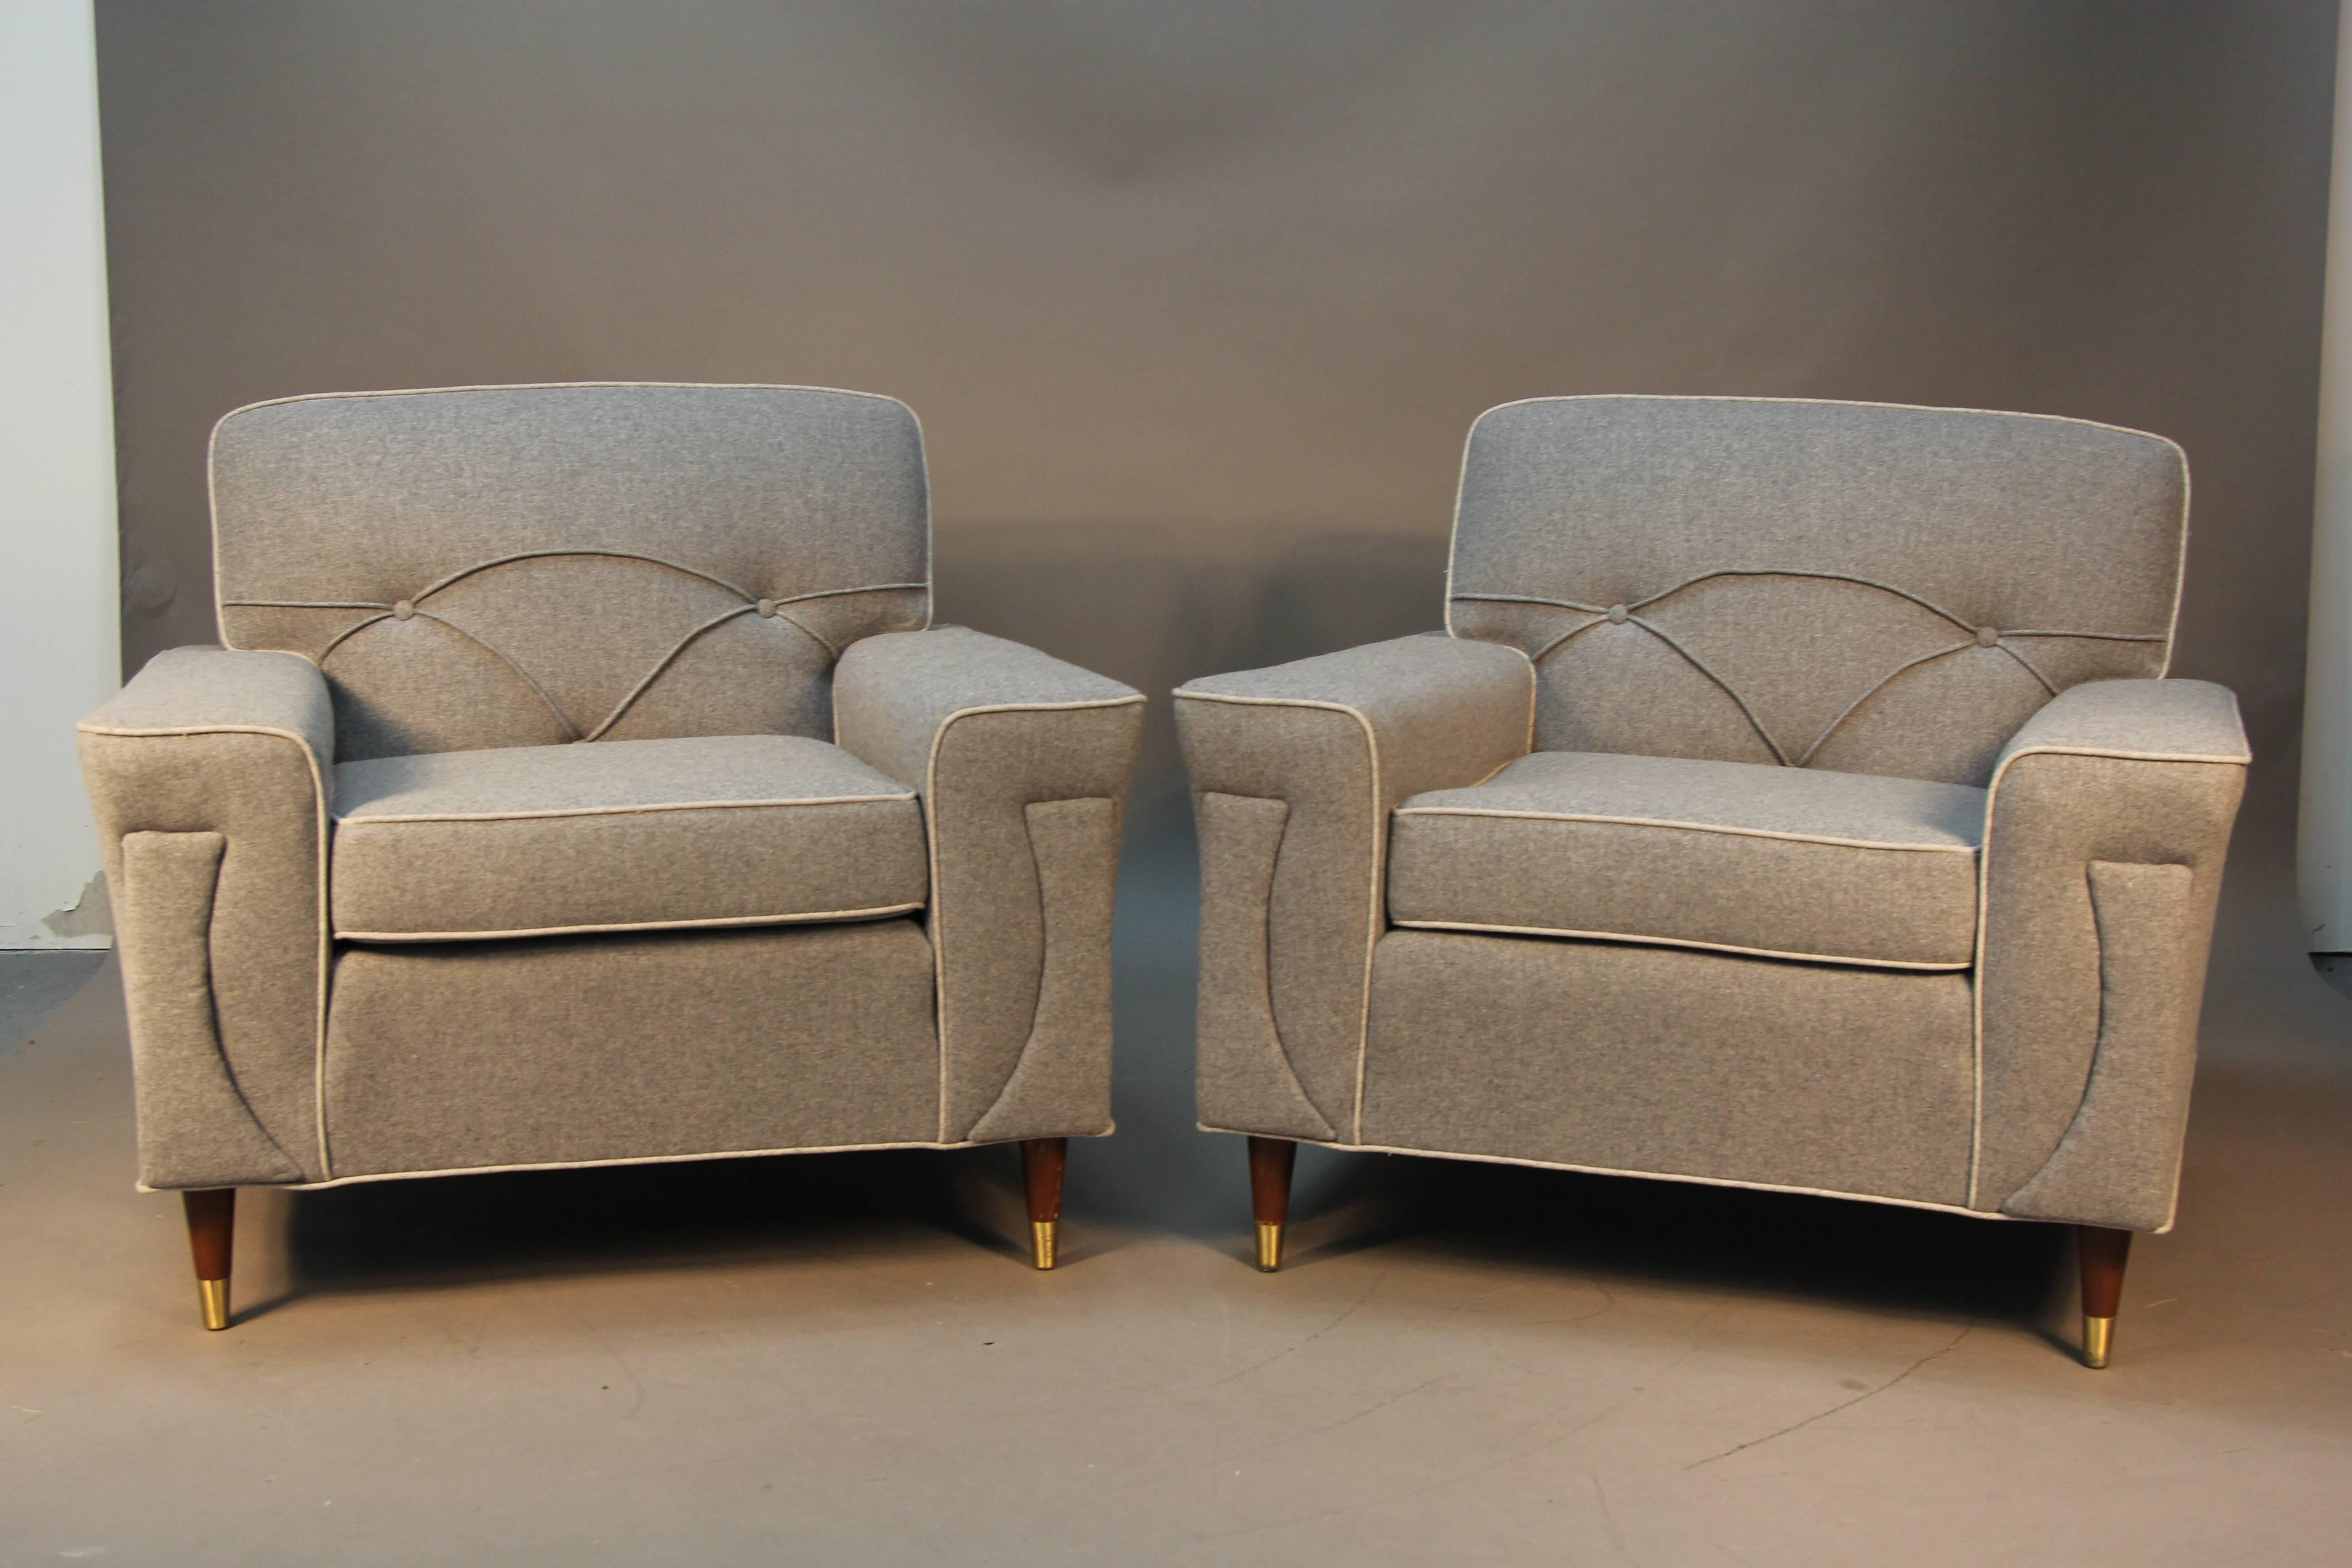 Gorgeous newly upholstered pair of Mid-Century Modern club chairs. Upholstered in grey wool with lighter contrast piping. Very unique tufting and seem details. Wooden legs with brass sabots. Very comfortable.